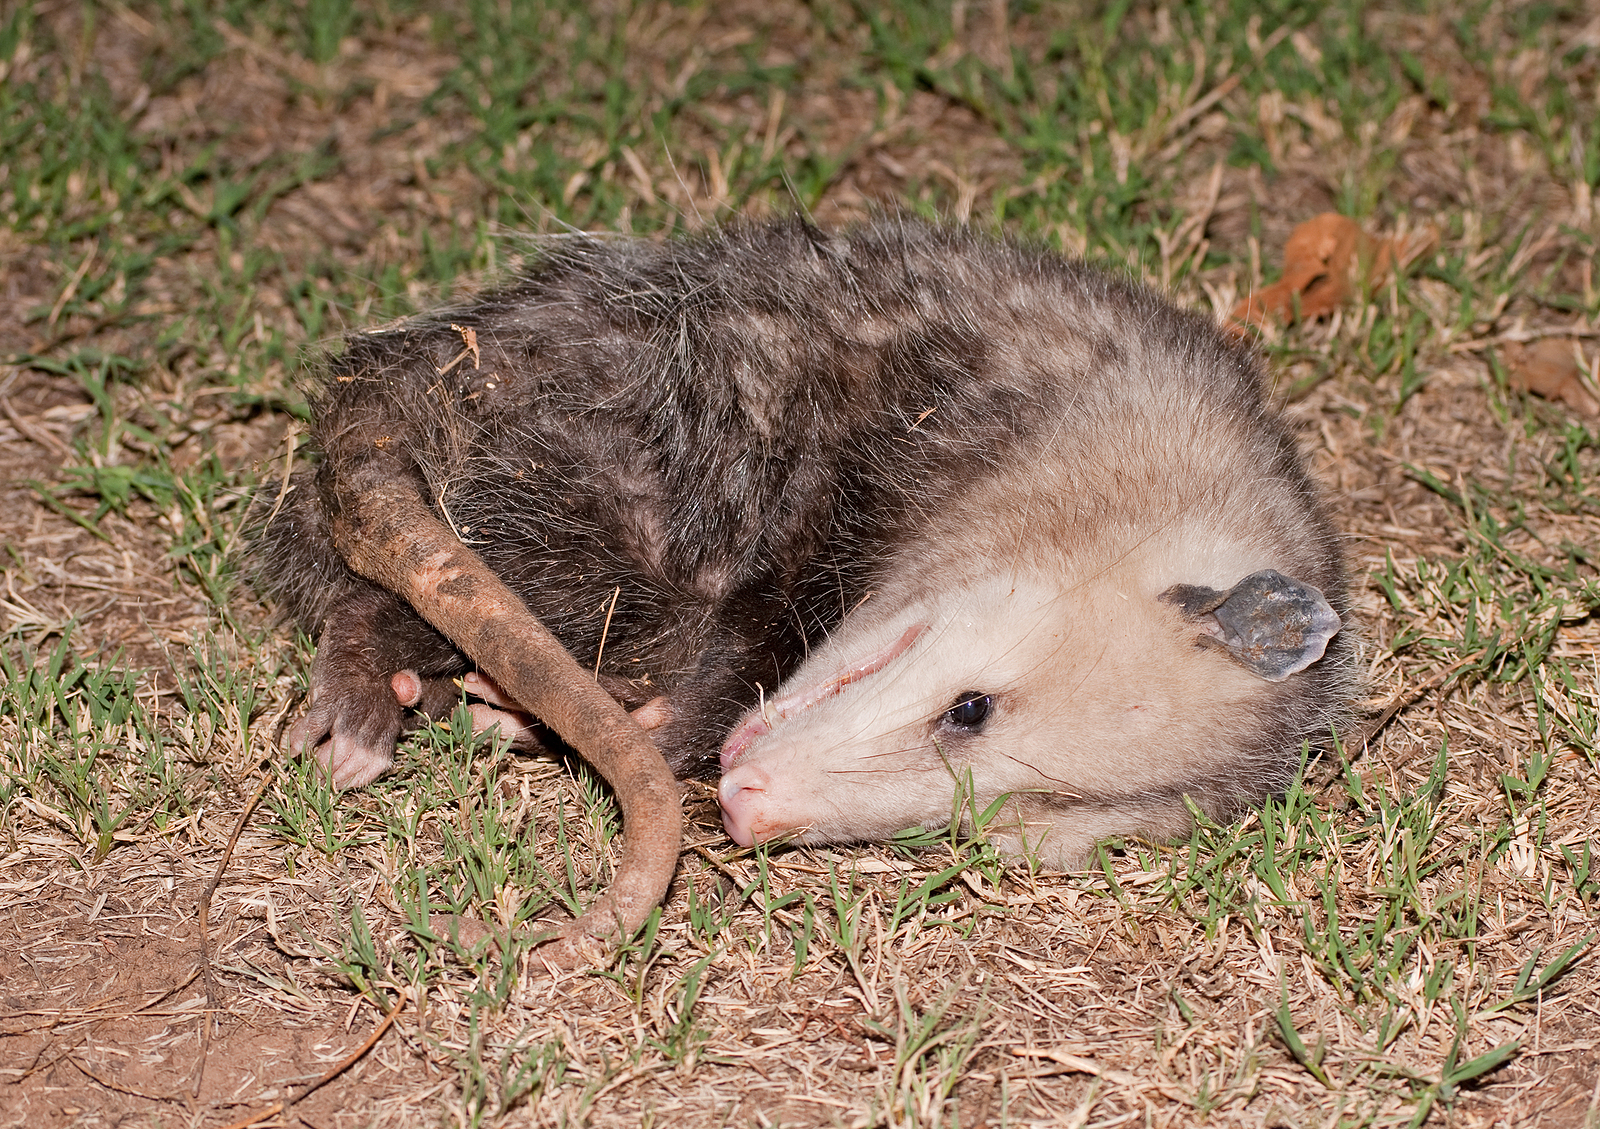 What Diseases Do Dead Possums Carry?